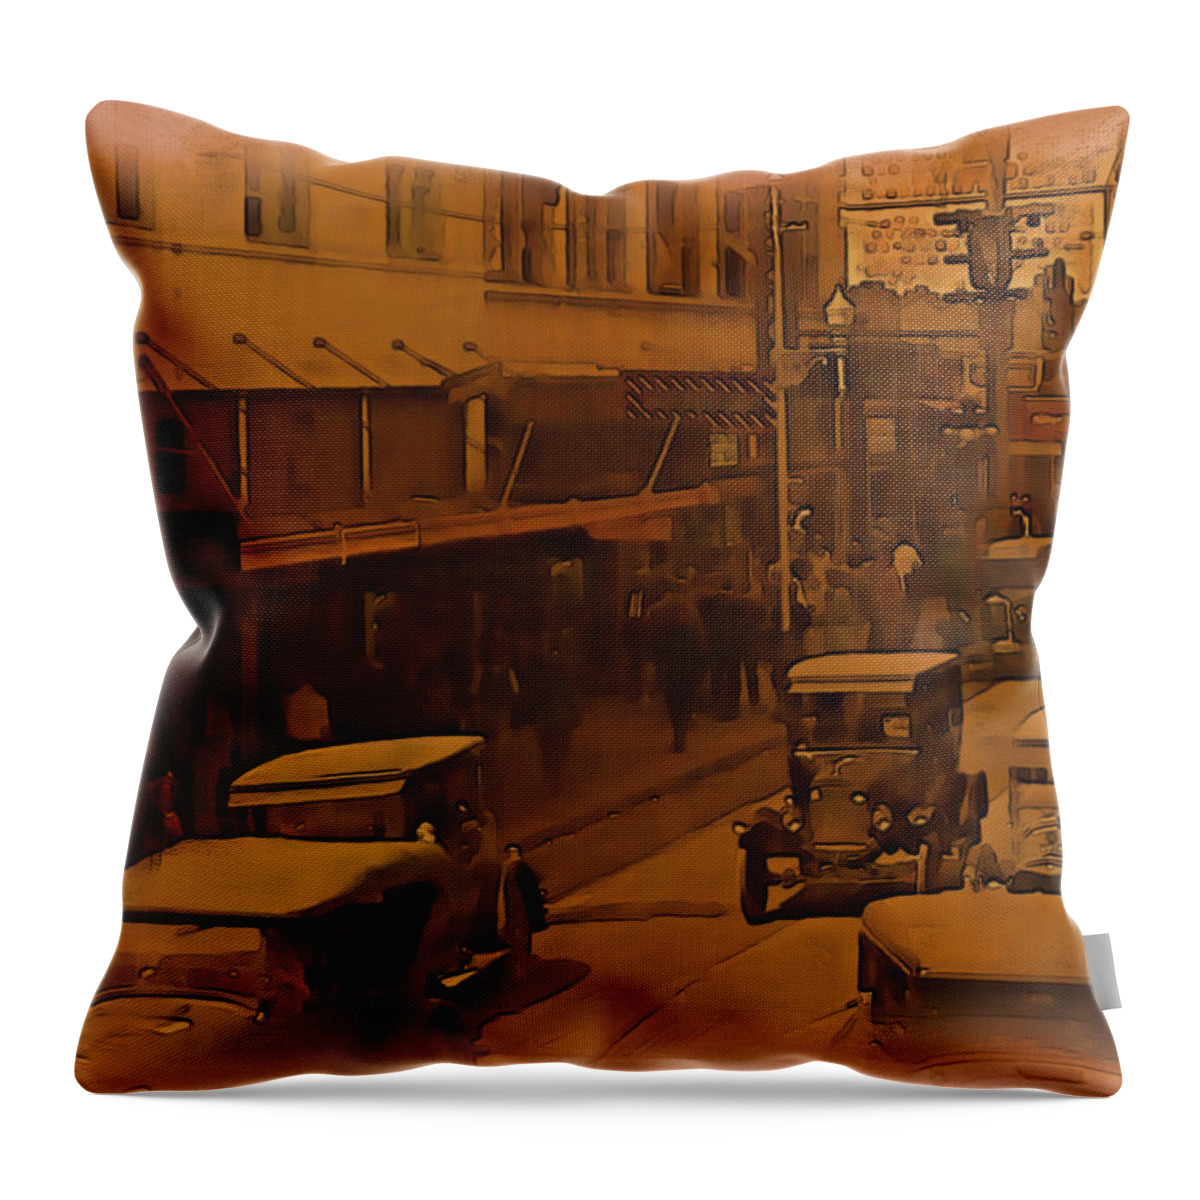 Historical Throw Pillow featuring the digital art Morning Traffic by Tristan Armstrong